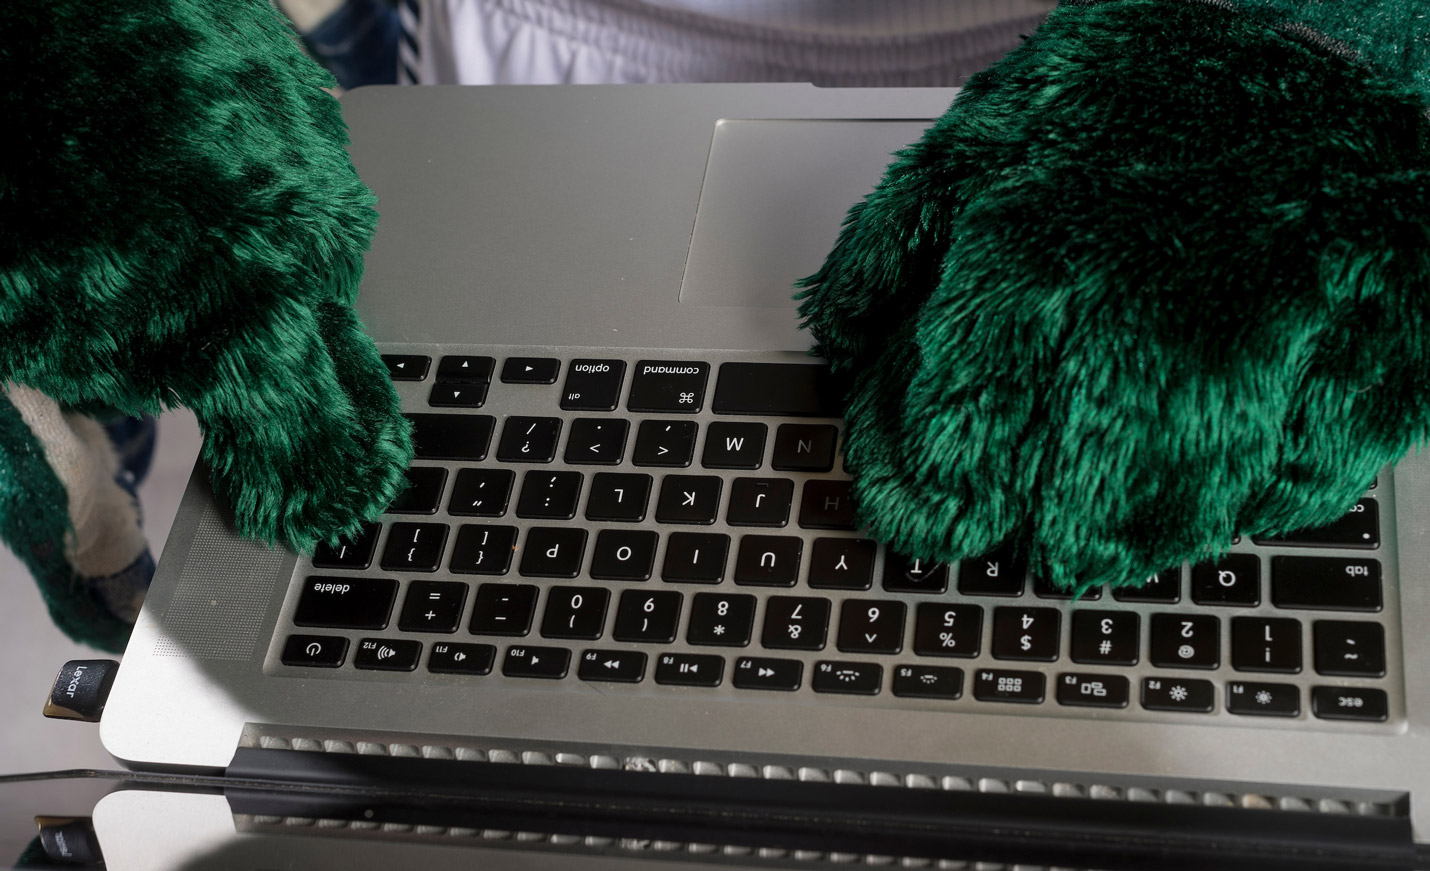 Our mascot, Sammy Seahawk typing on a laptop